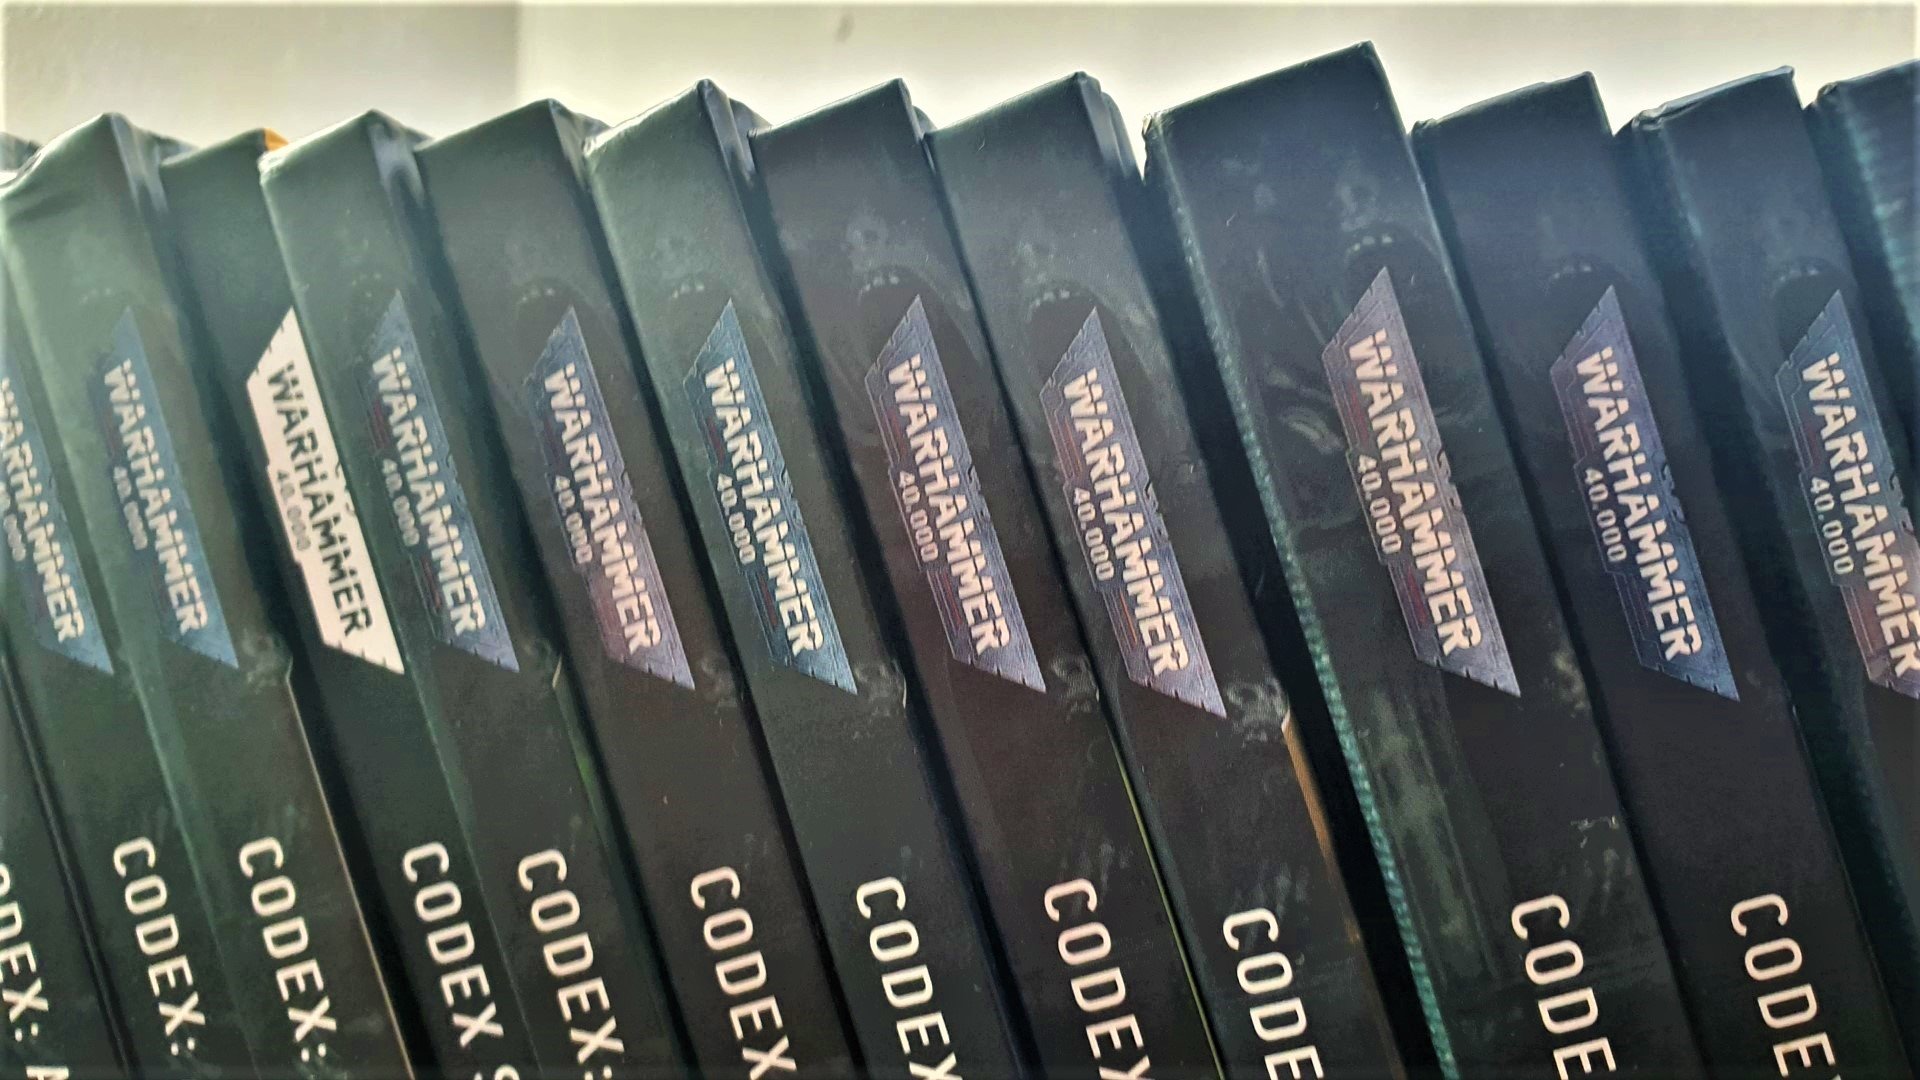 Warhammer 40k codex release date guide - author photo showing titles and spines of Warhammer 40k codex books